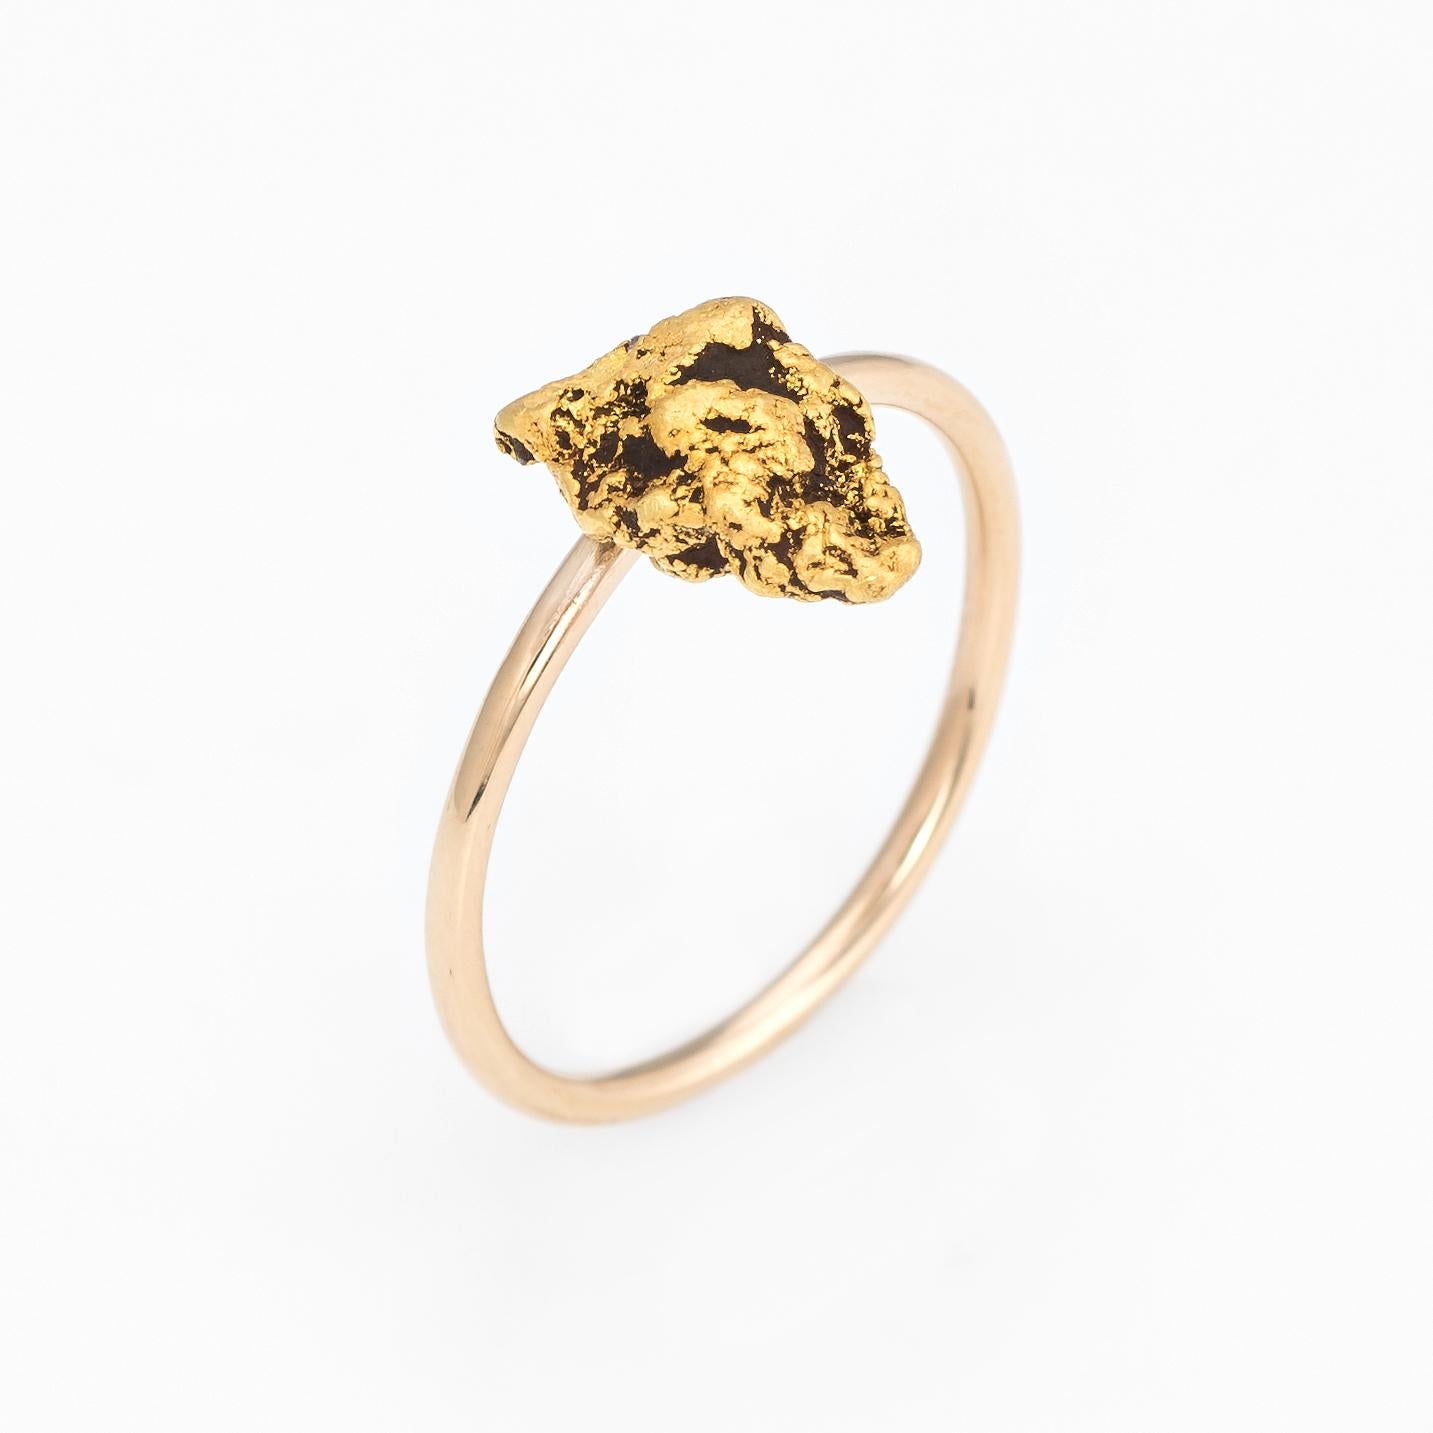 Originally an antique Victorian era stick pin (circa 1880s to 1900s), the nugget ring is crafted in 14 karat yellow gold. 

The ring is mounted with the original stick pin. Our jeweler rounded the stick pin into a slim band for the finger. The